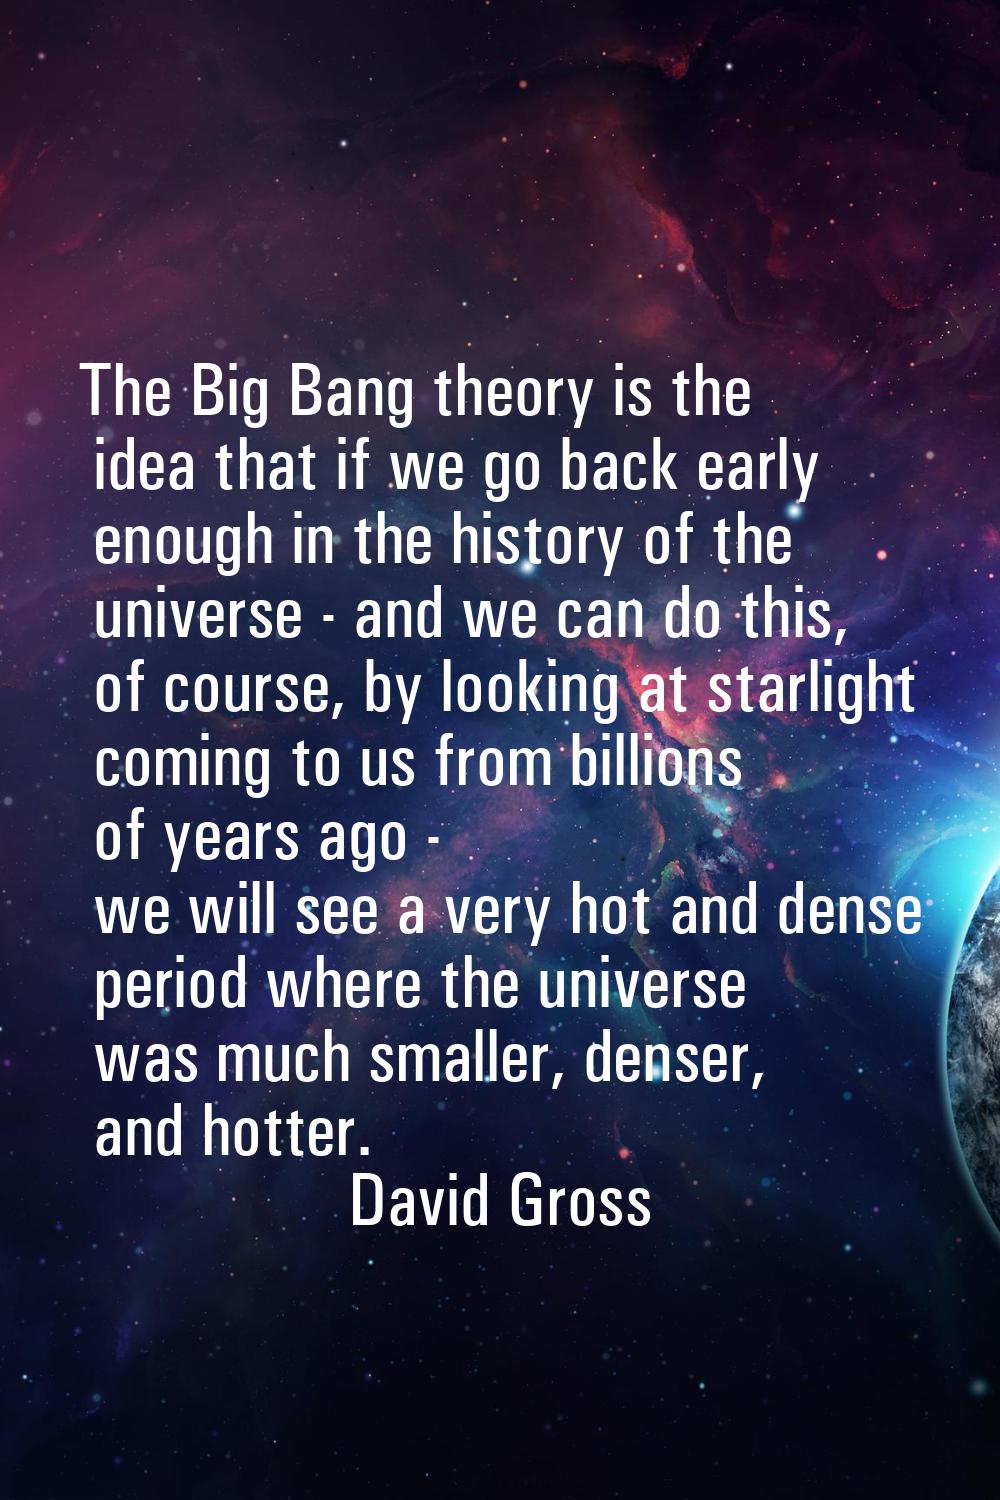 The Big Bang theory is the idea that if we go back early enough in the history of the universe - an